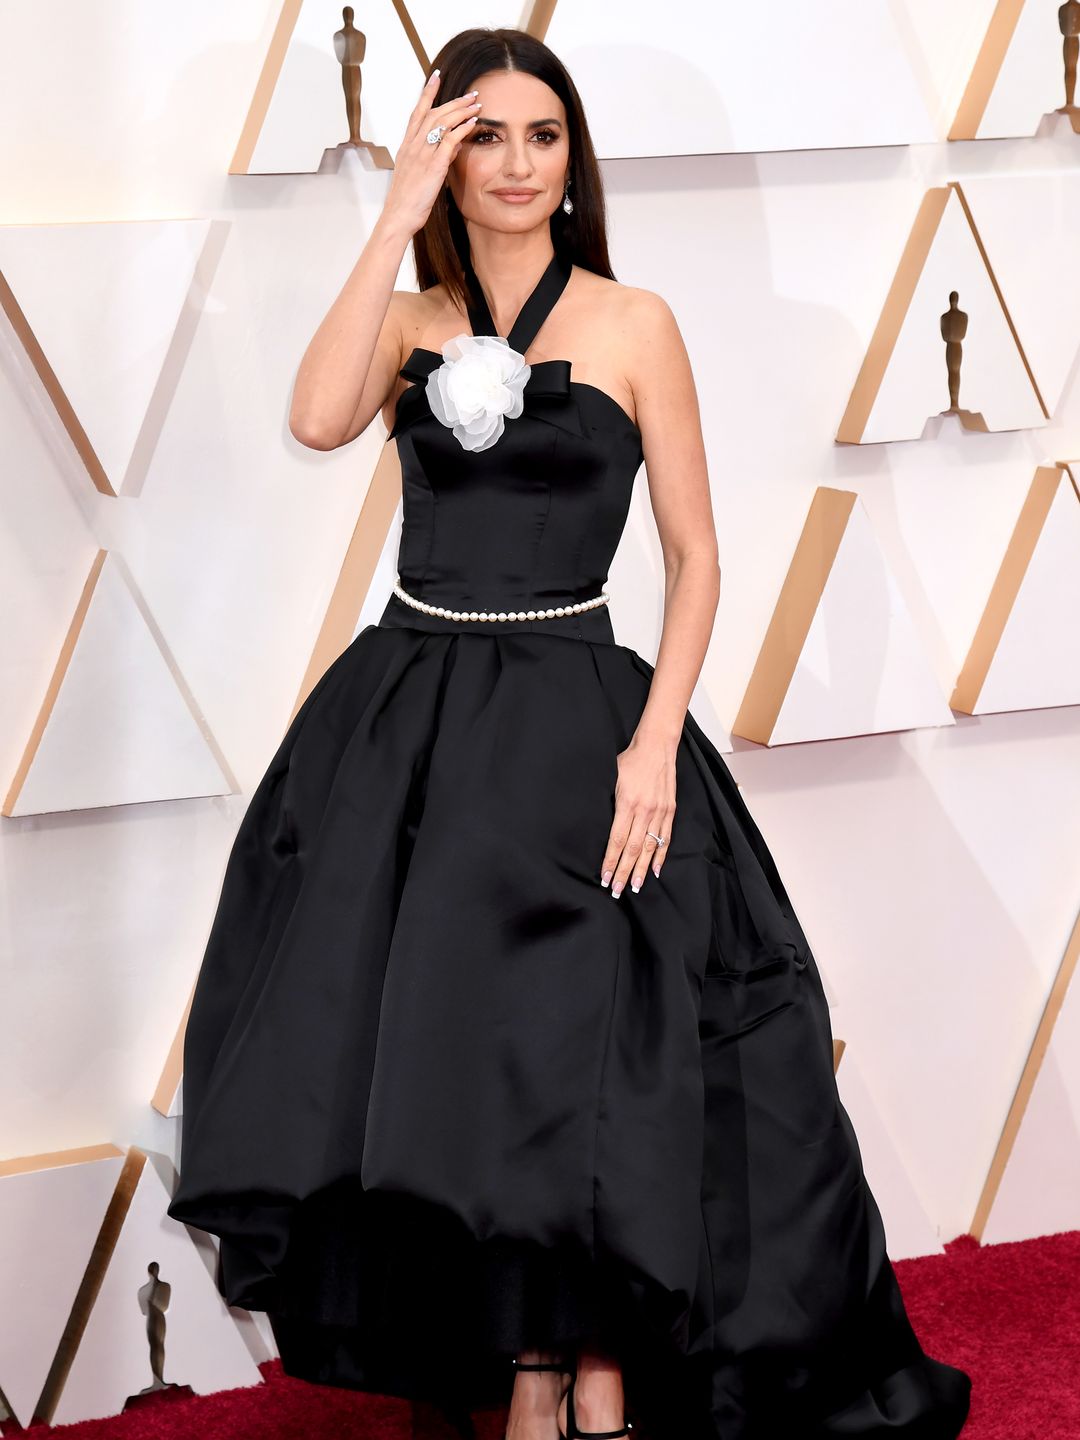 Penélope Cruz wears a black gown with a pearl belt to the 92nd Annual Academy Awards